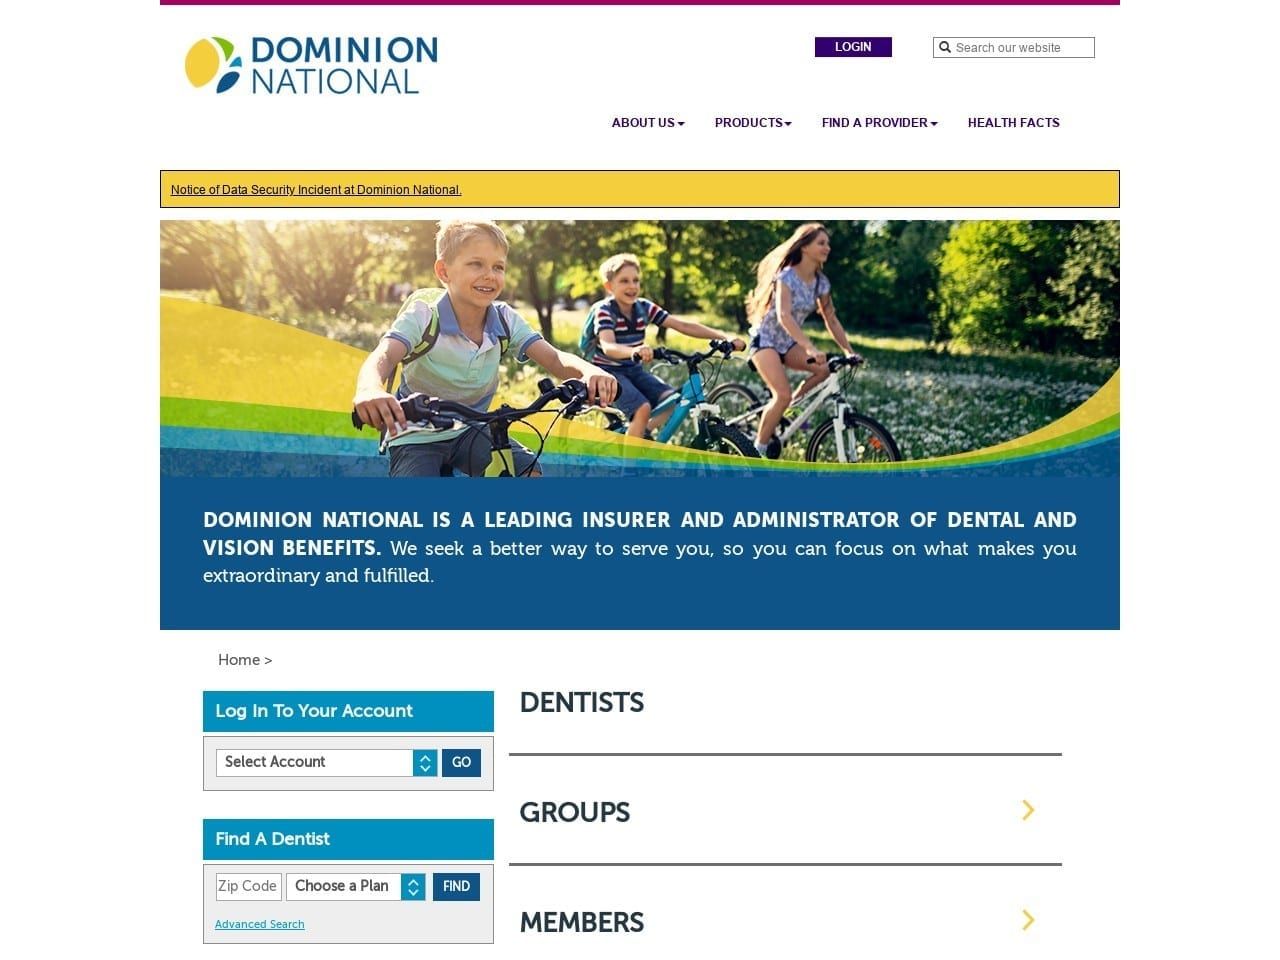 Dominion Dental Services Inc Website Screenshot from dominiondental.com